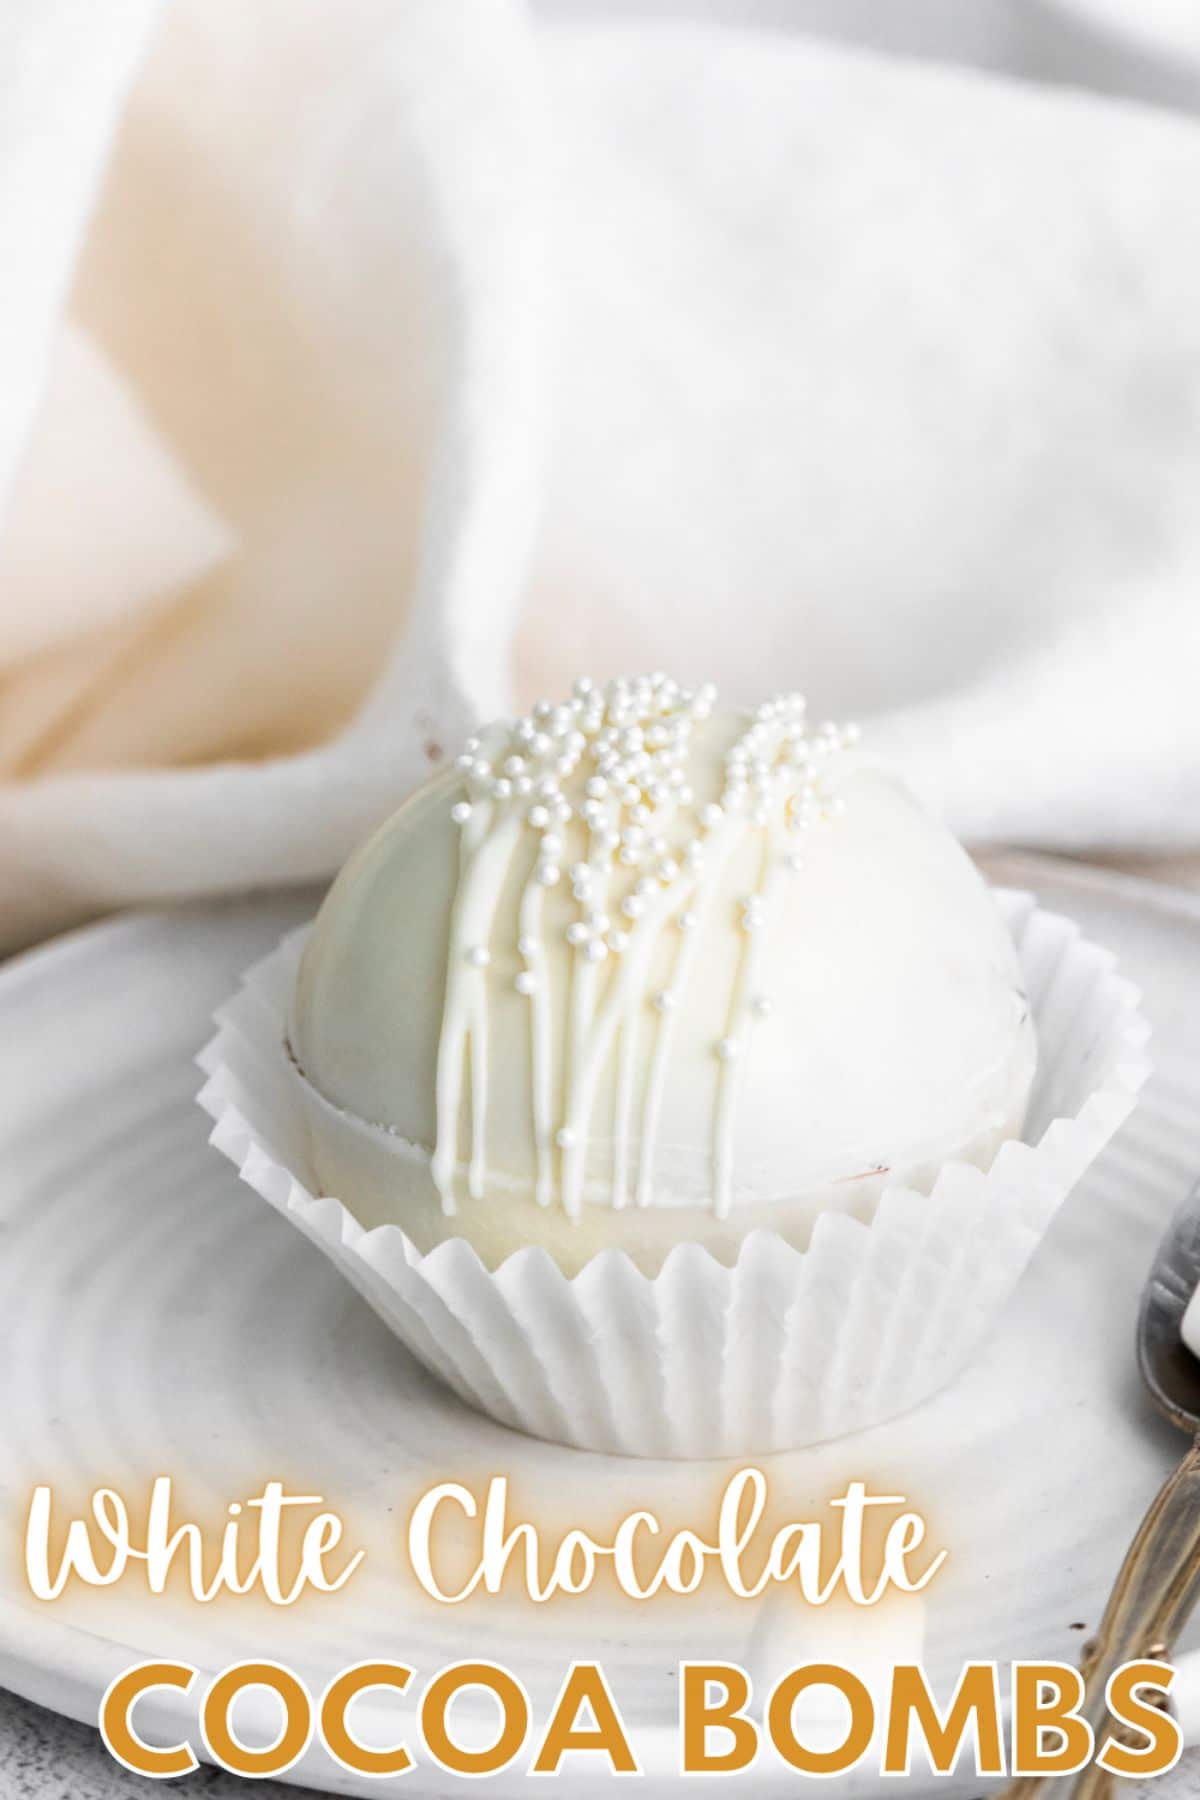 A vertical image of a White Chocolate Hot Cocoa Bomb on a white serving plate with a spoon beside it and cursive text at the bottom saying "White Chocolate Cocoa Bombs"